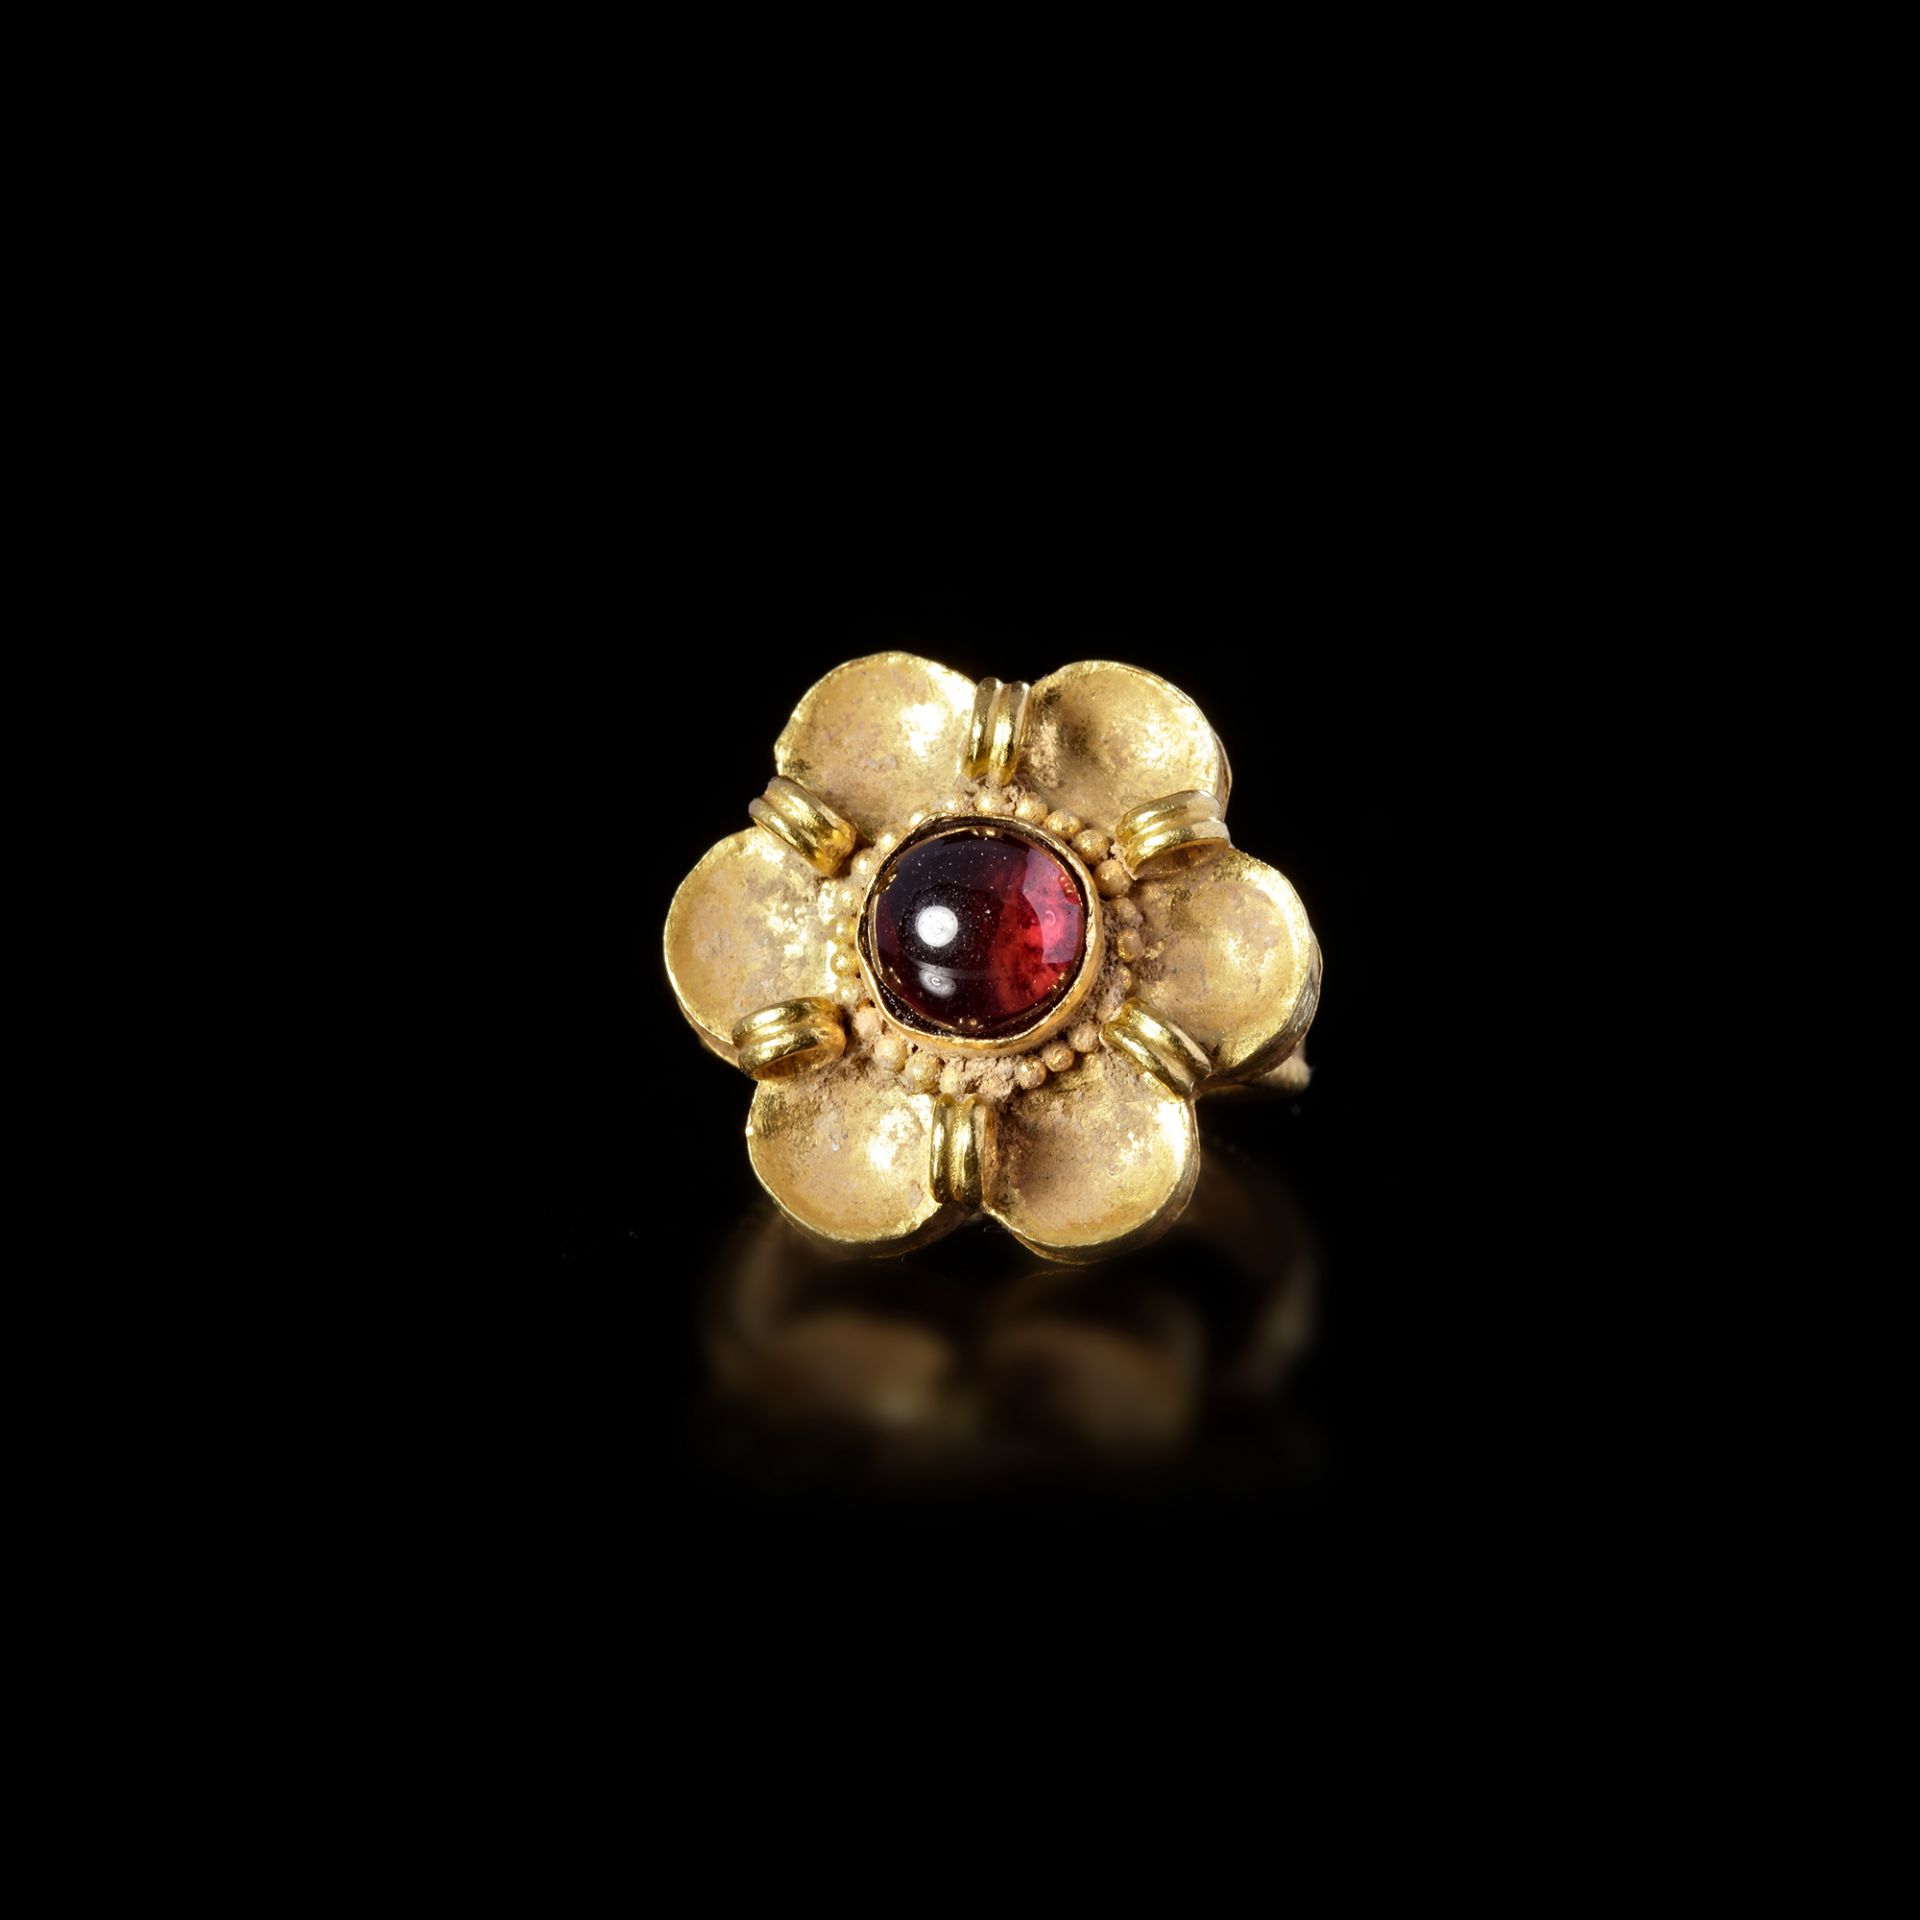 A LATE ROMAN/EARLY BYZANTINE GOLD RING WITH A GARNET, 5TH-6TH CENTURY AD